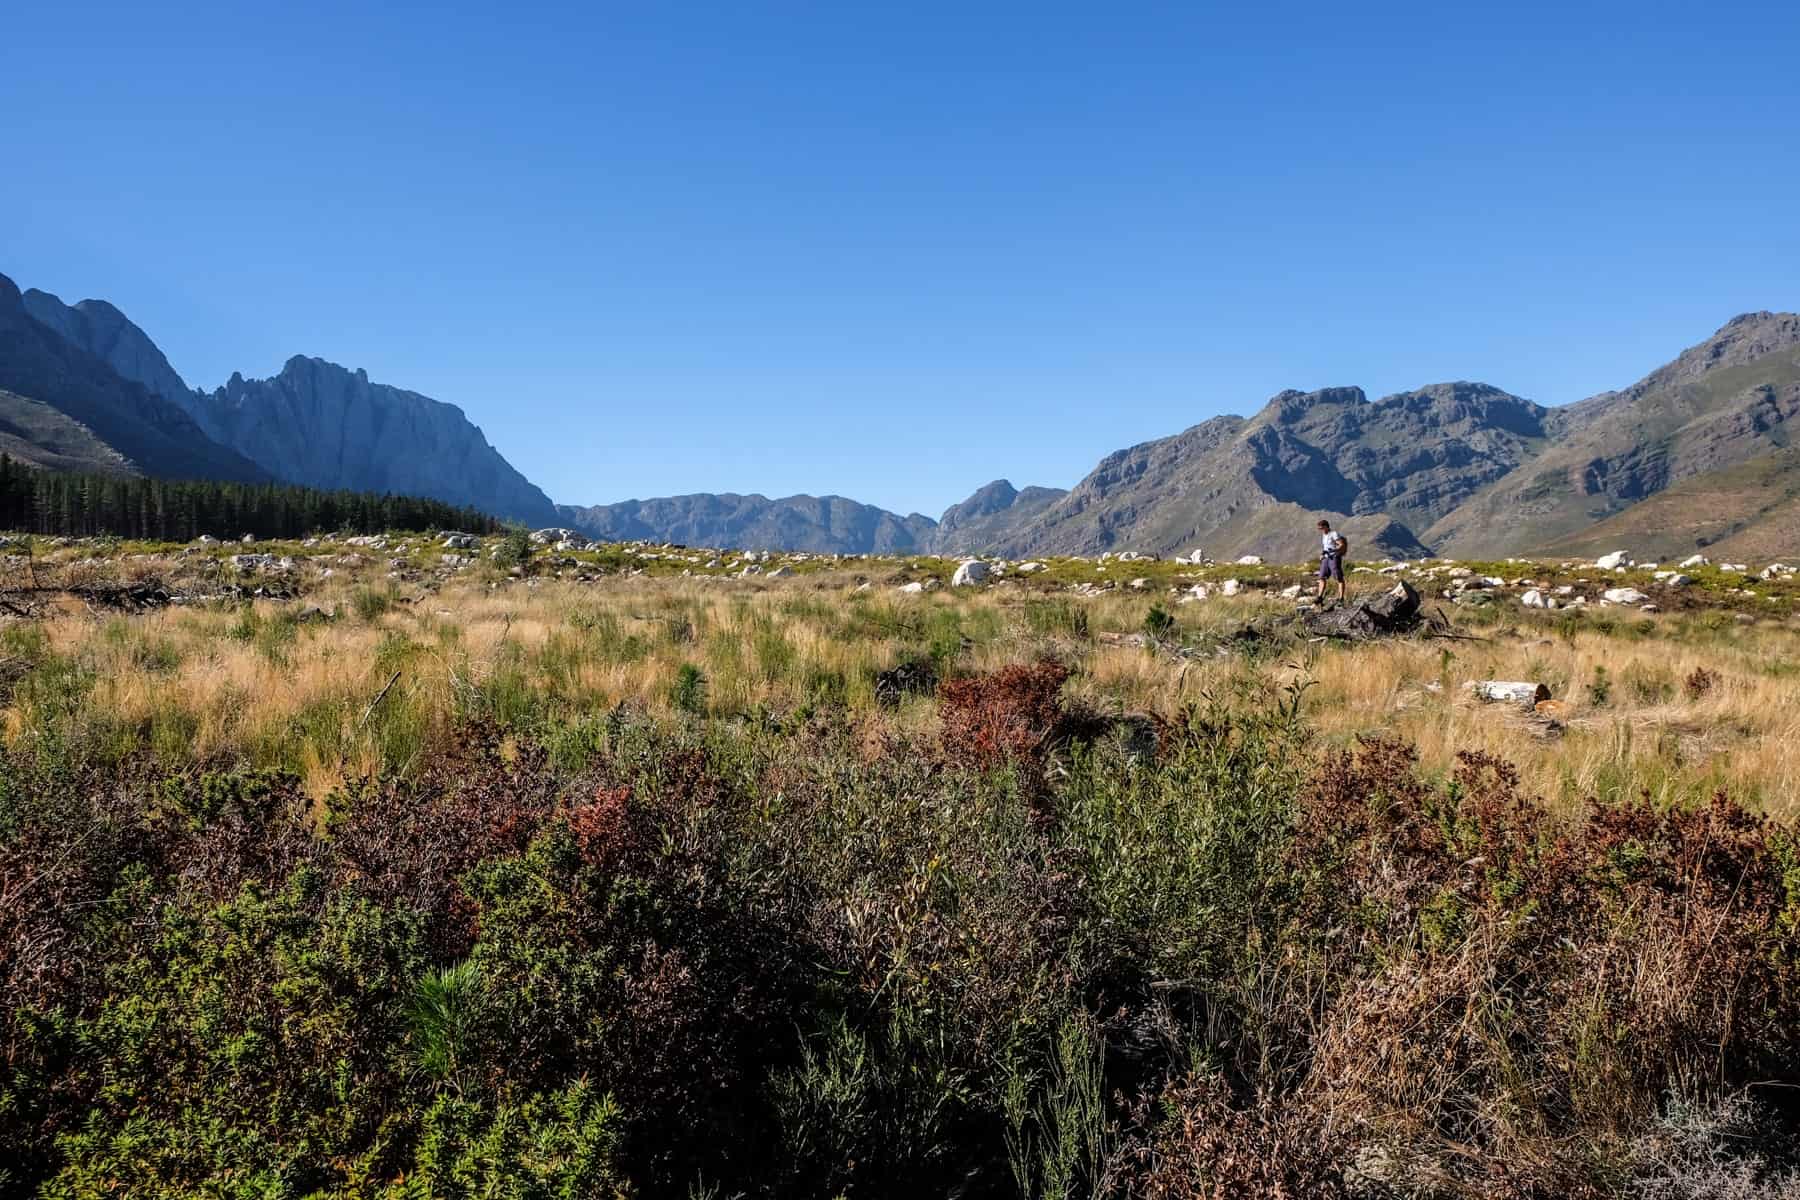 A man can be seen in the distance, hiking within the thick yellow and green grass of a national park in South Africam backed by low mountains